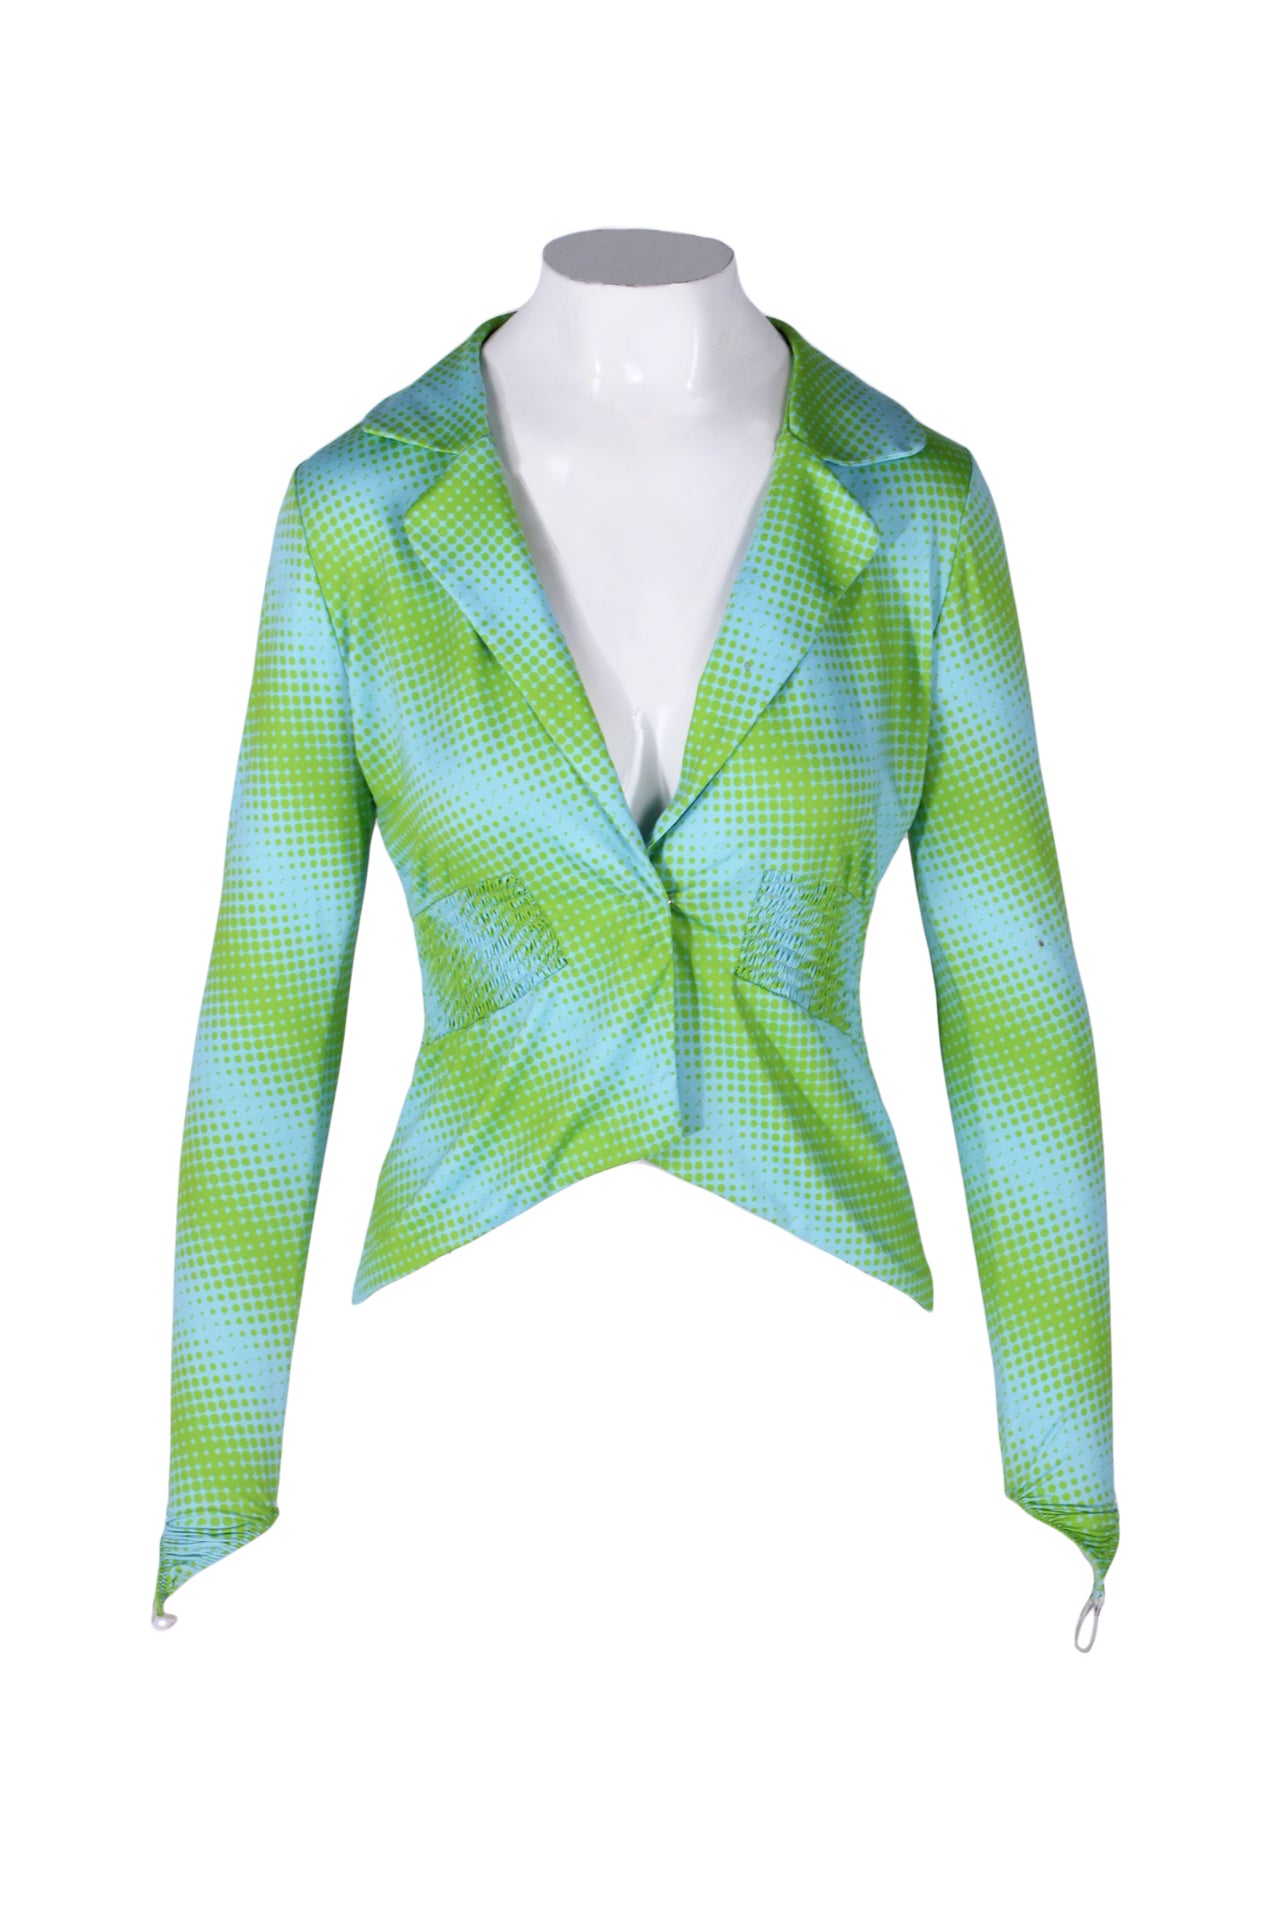 description: maisie wilen blue and green abstract polka dot long sleeve shirt. features lapel collar, deep v neckline, and ruched at waistline.